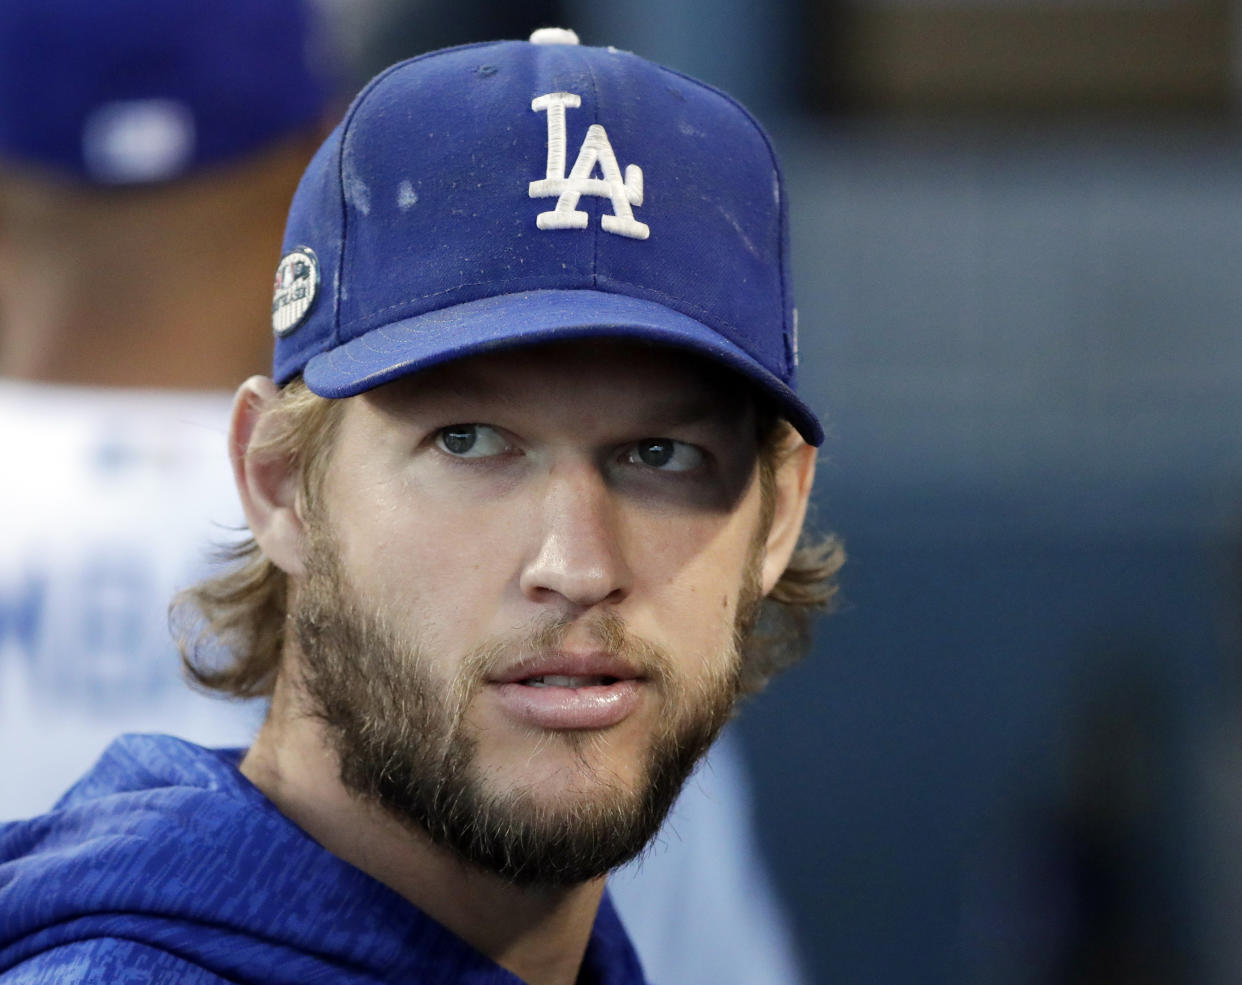 Clayton Kershaw is expected to pitch against the Twins on Tuesday. (AP Photo/Jae C. Hong, File)